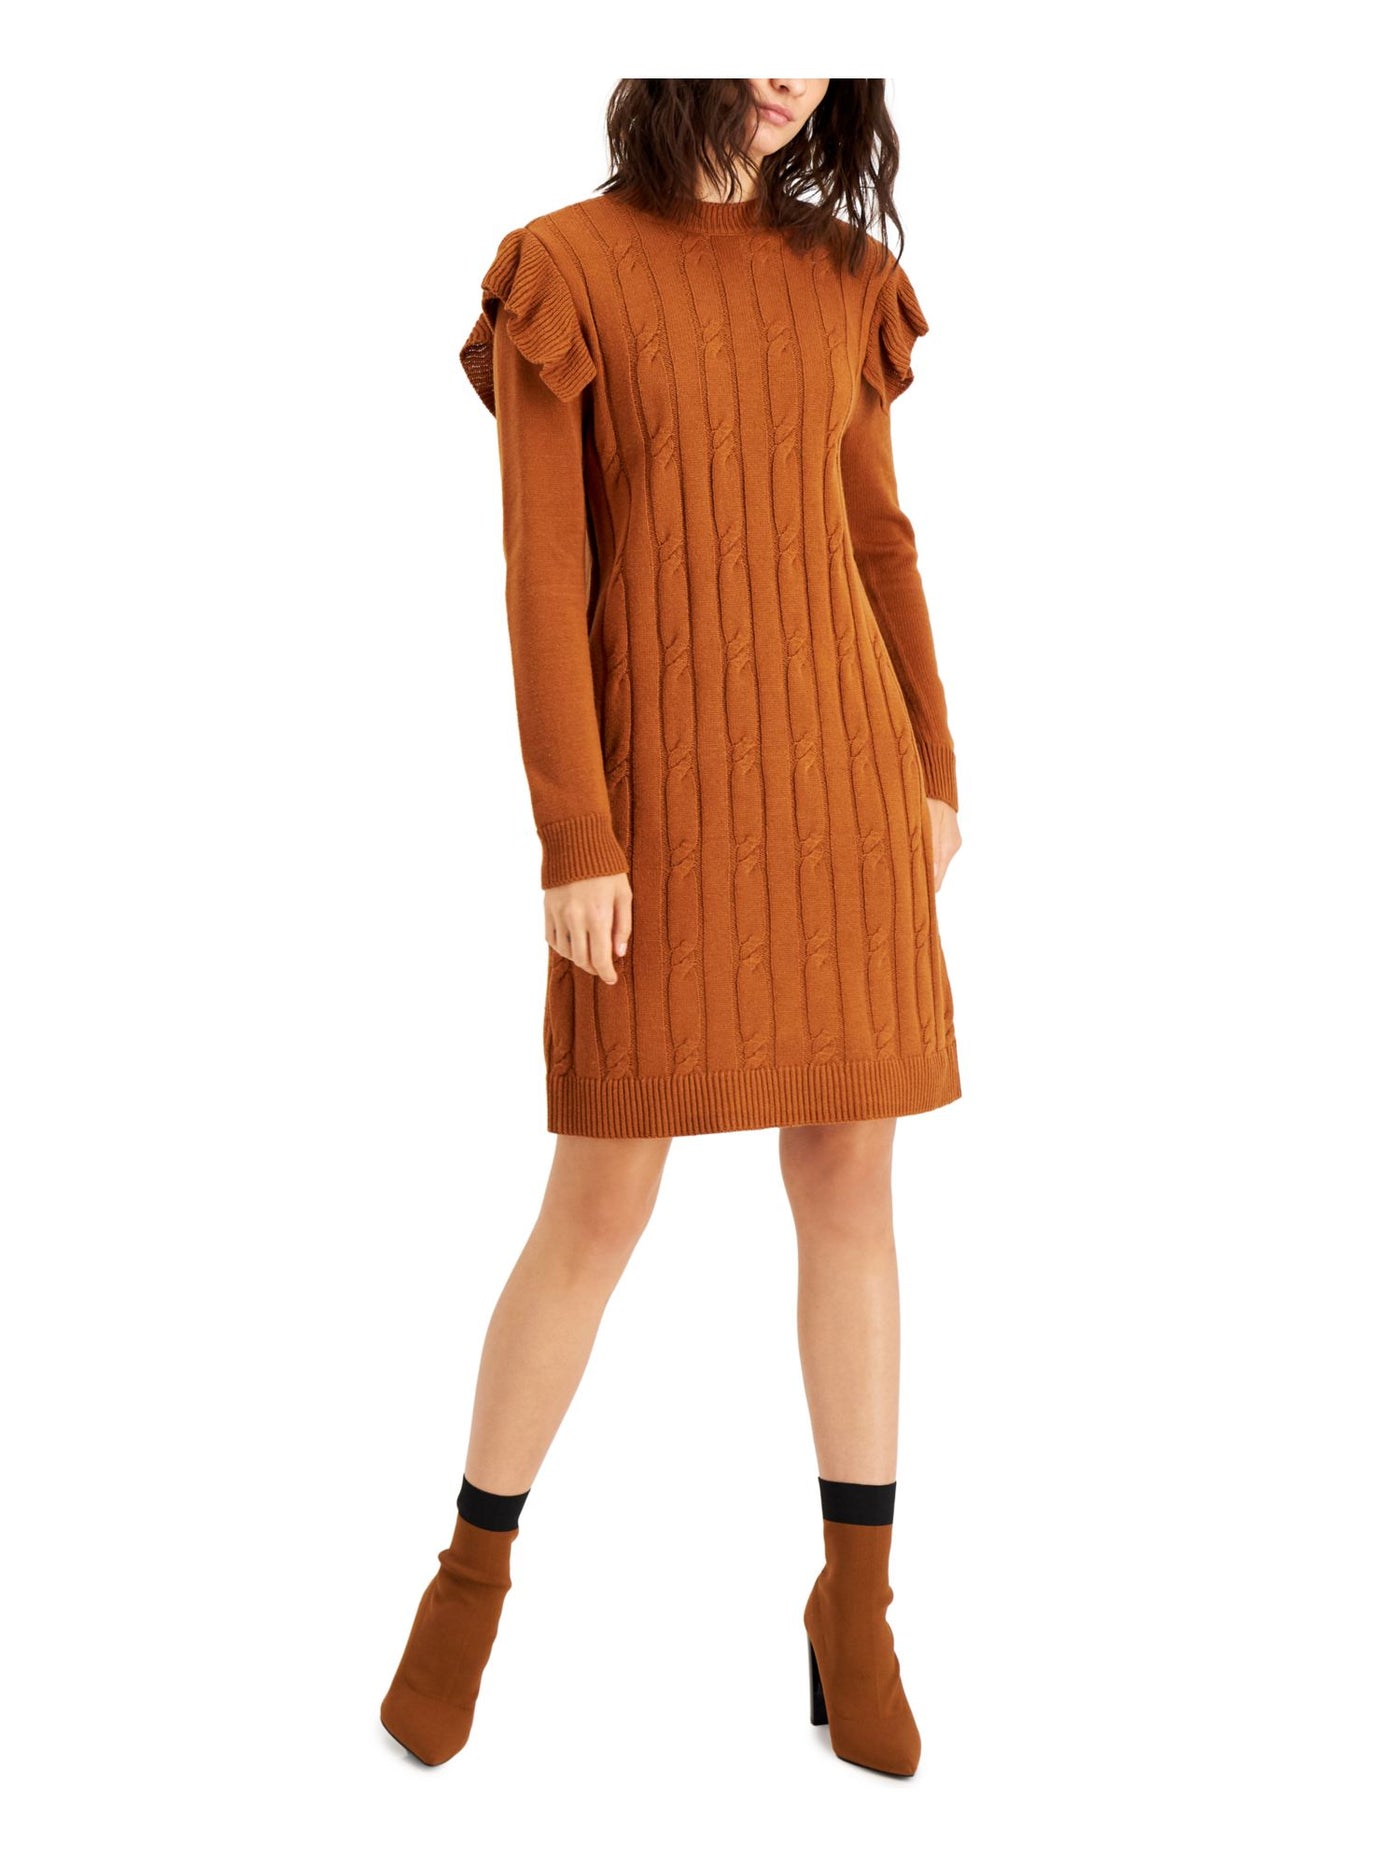 BAR III DRESSES Womens Brown Ruffled Cable-knit Front Long Sleeve Crew Neck Above The Knee Sweater Dress M